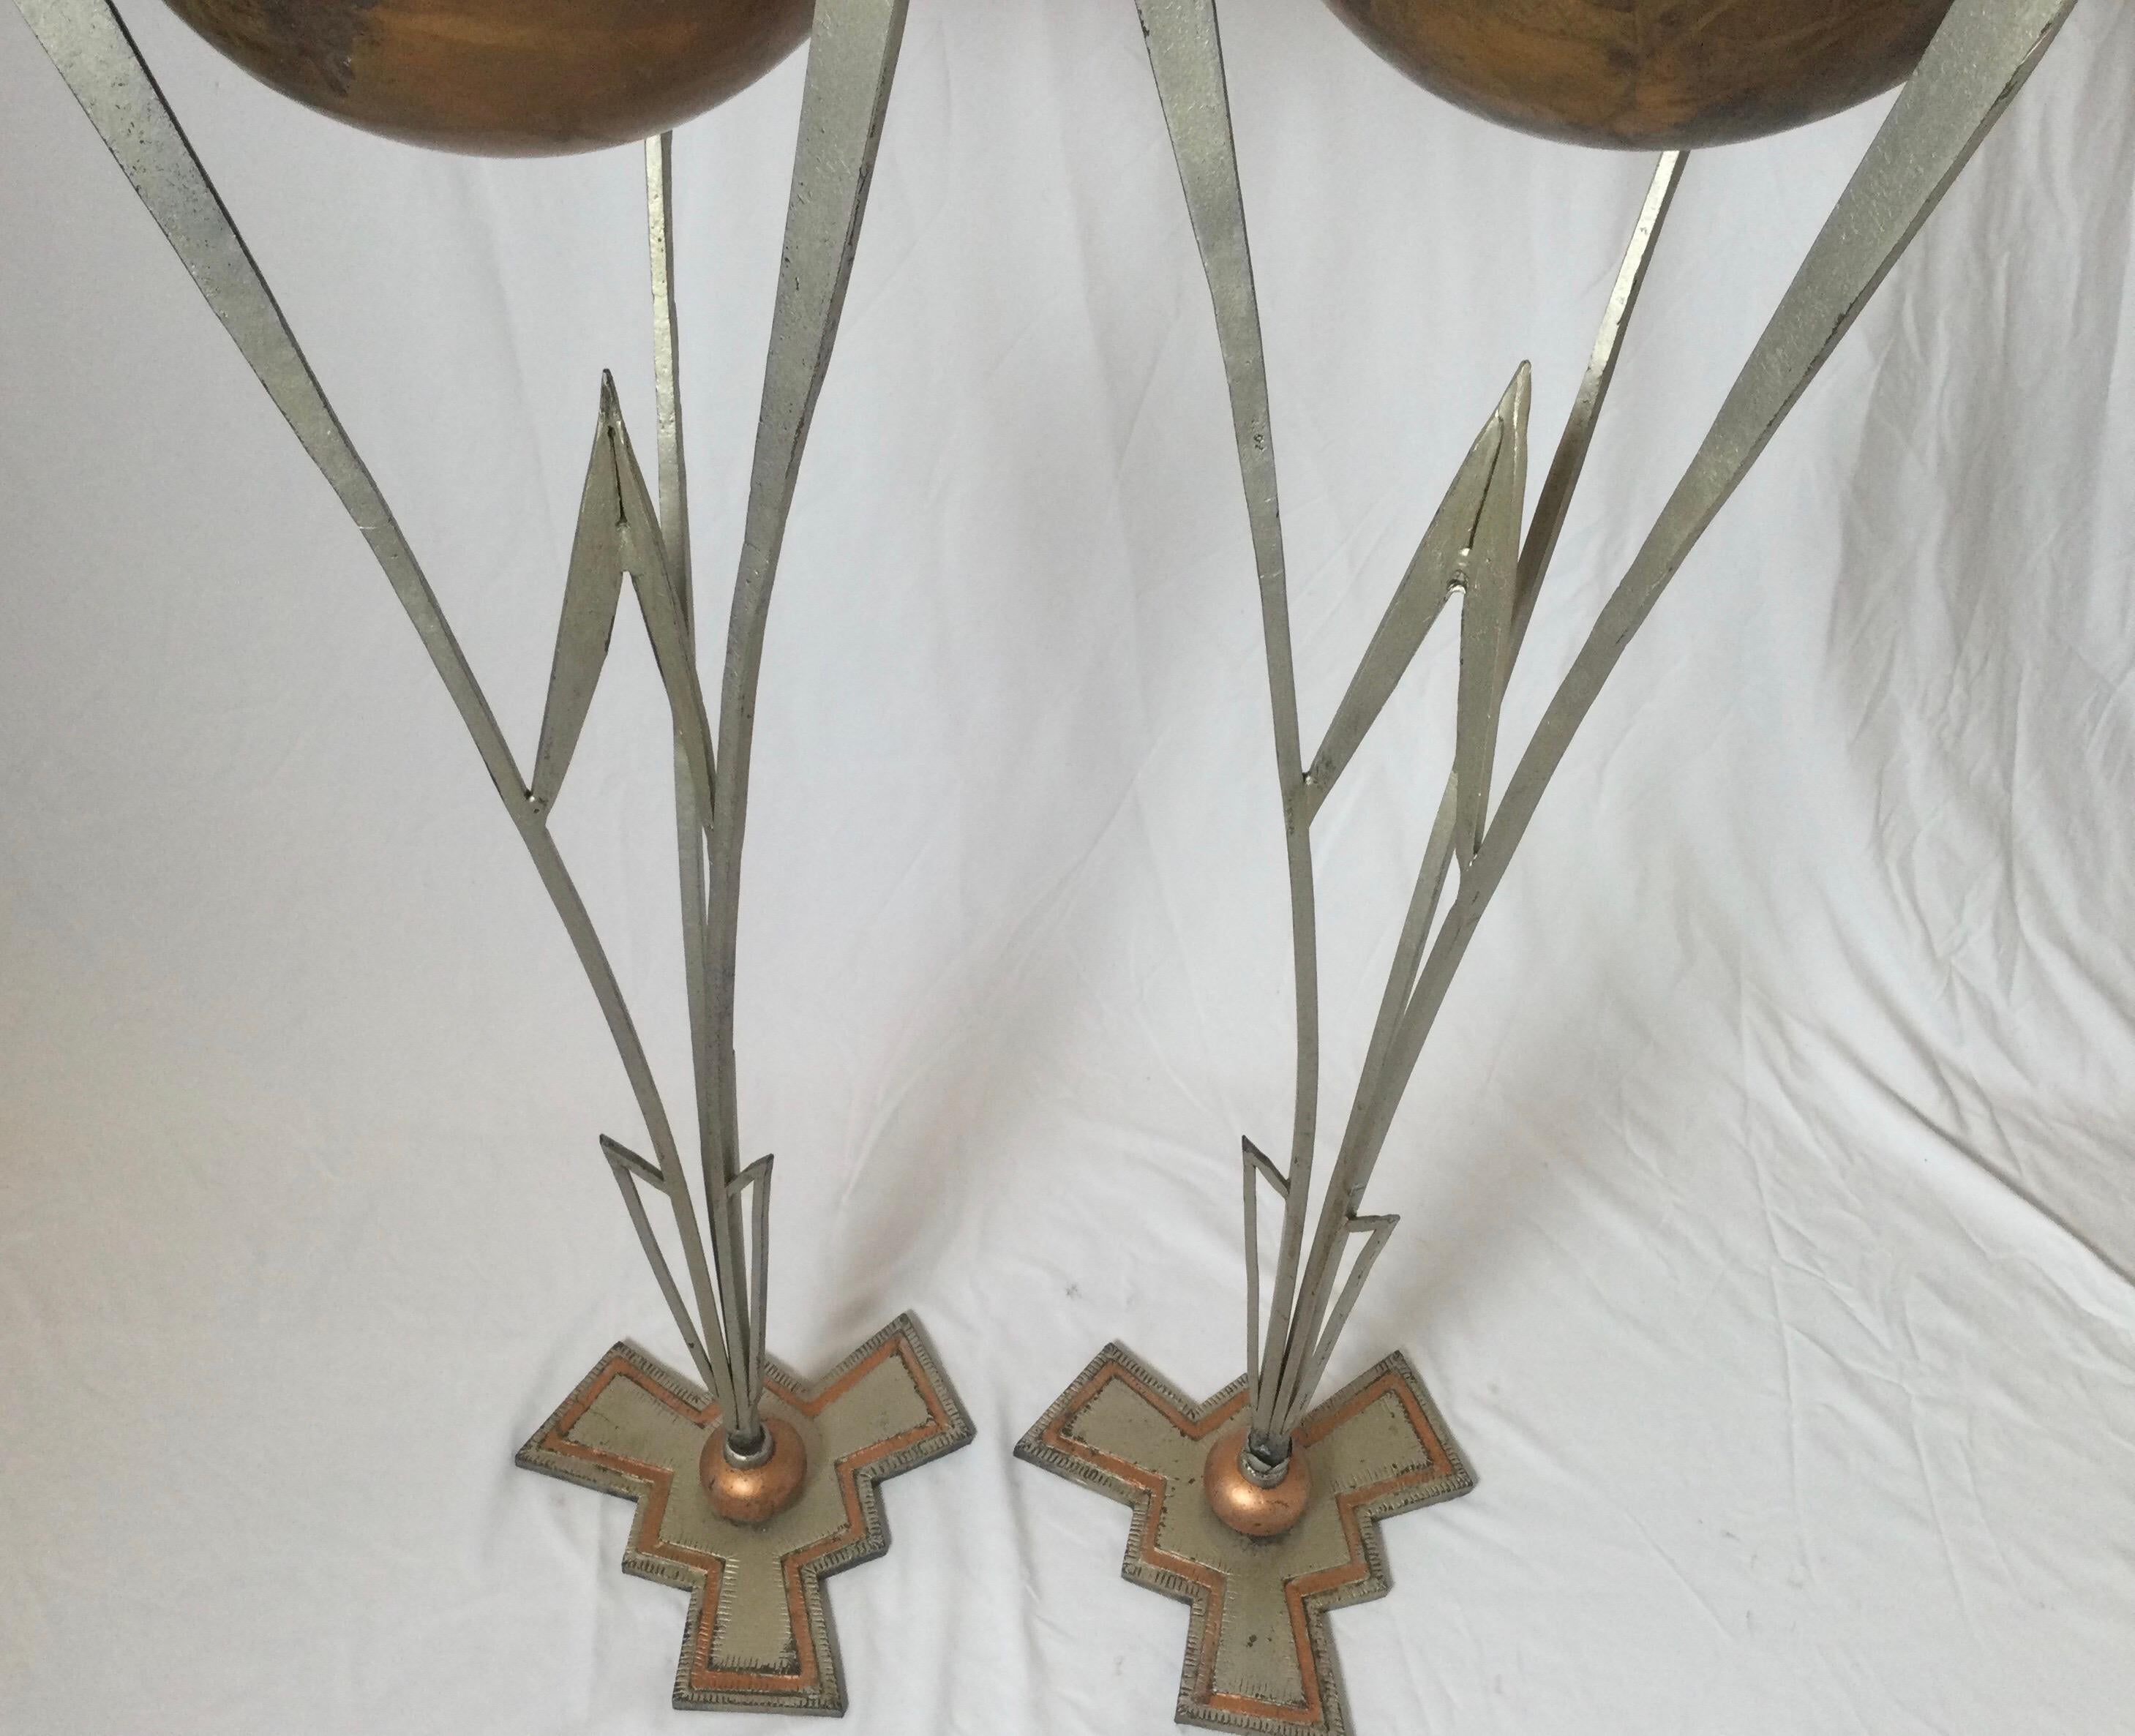 Pair of Art Deco Iron and Copper Plant Stands Attributed to Warren MacArthur For Sale 1